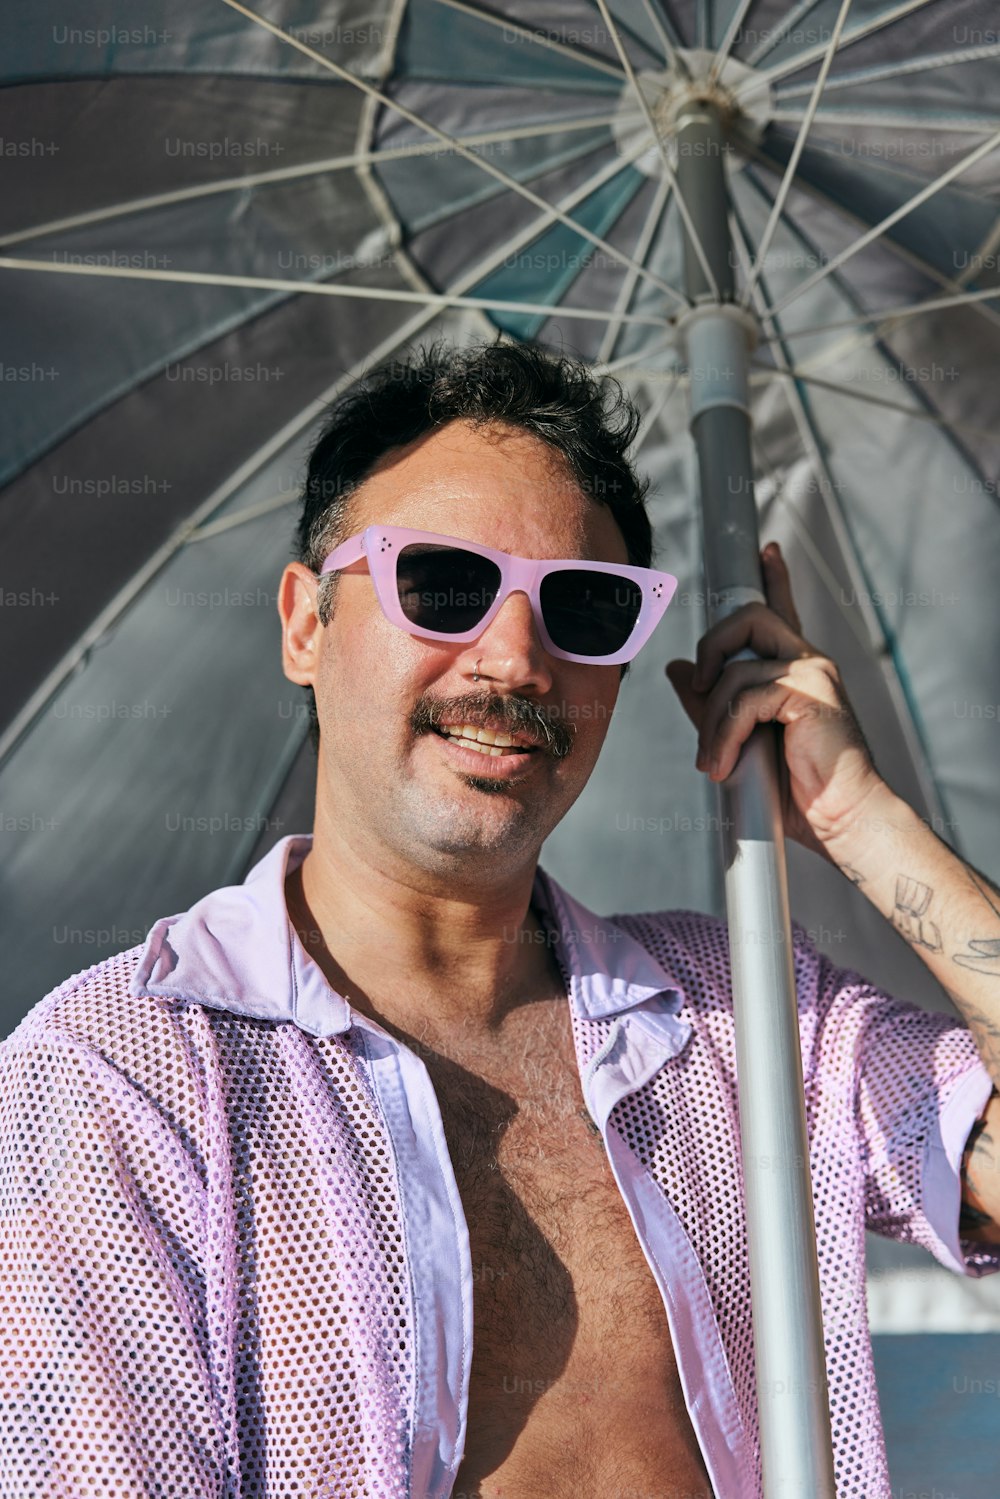 a man in a pink shirt and sunglasses holding an umbrella